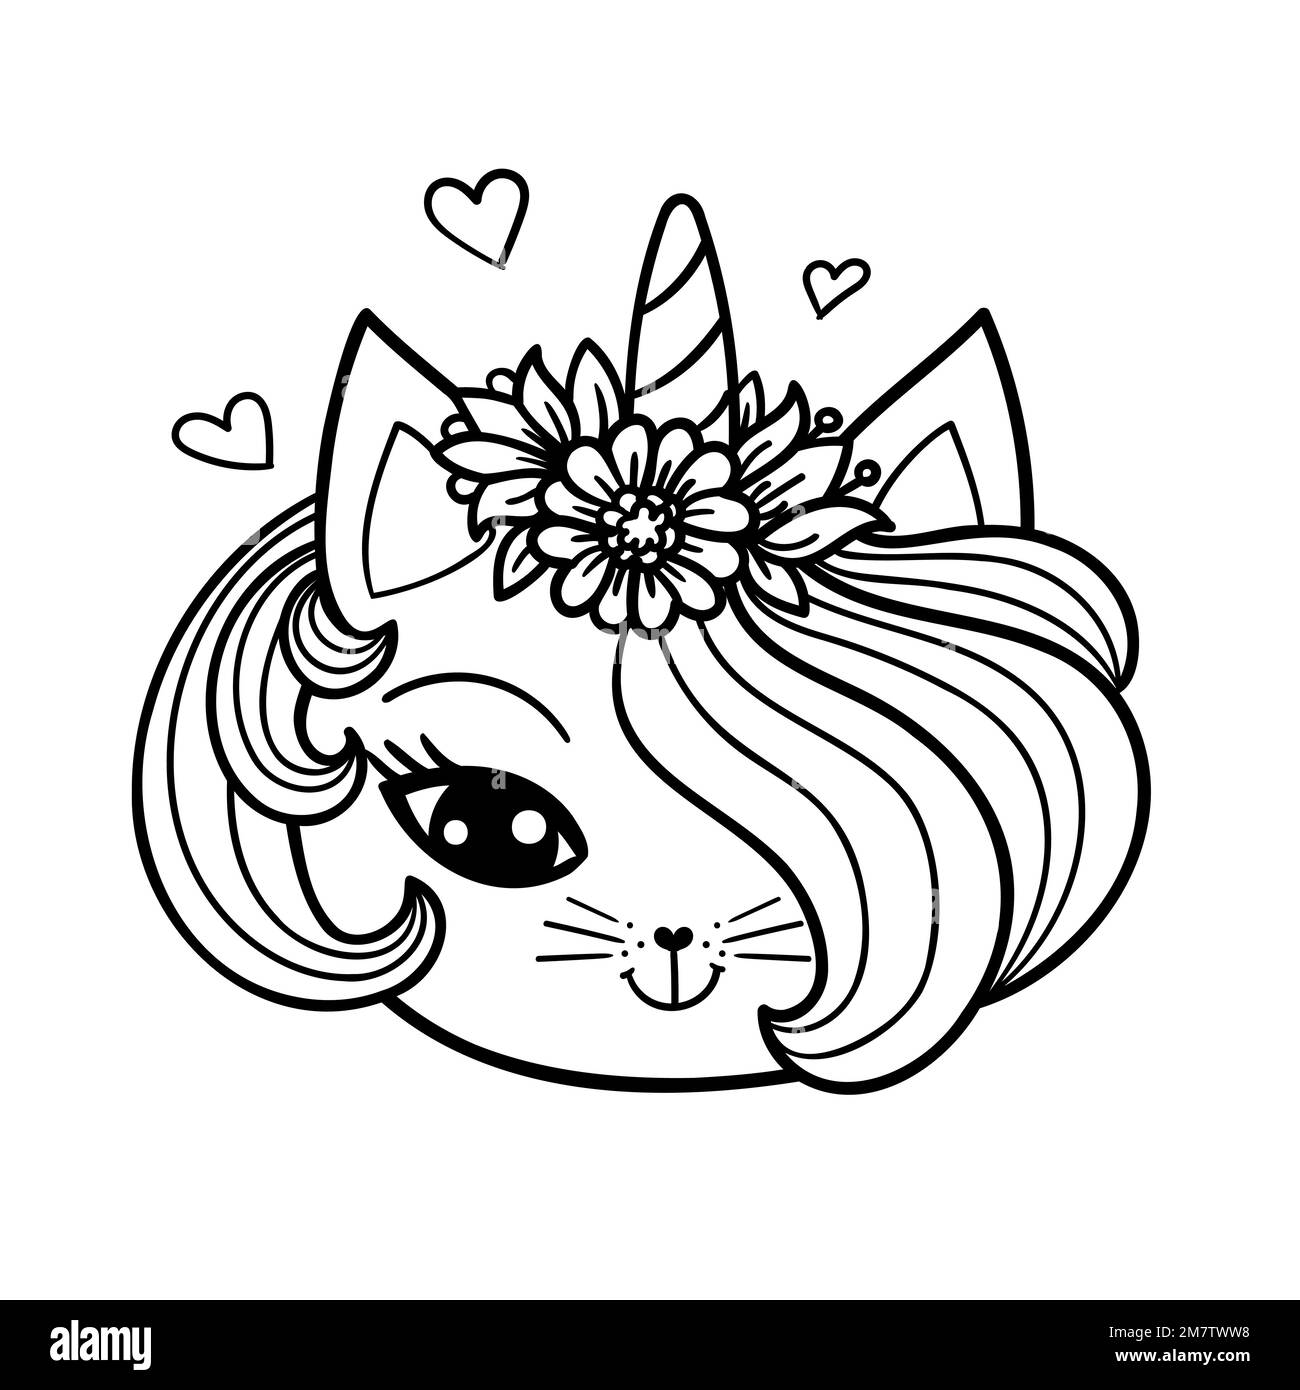 The head of a cute unicorn cat. Black and white linear drawing. Doodle style. For children's design of coloring books, prints, posters, stickers, post Stock Vector